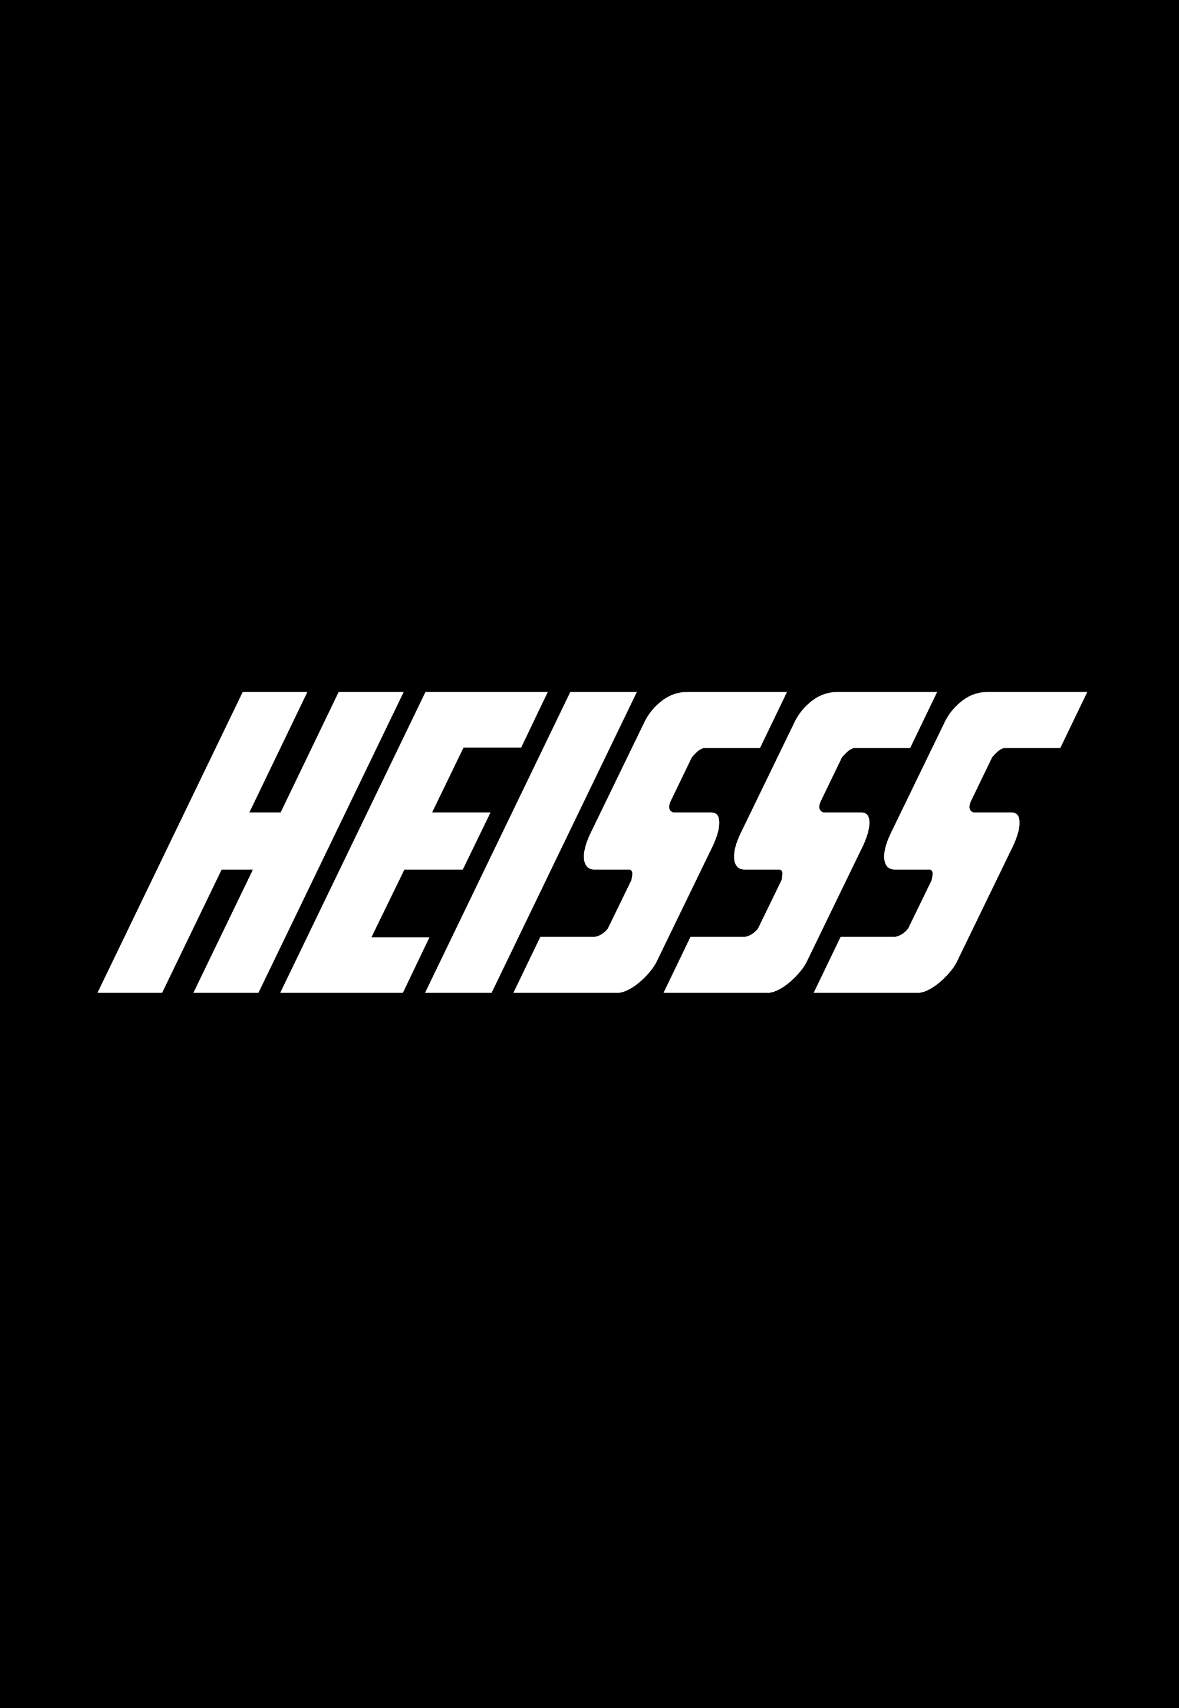 HEISSS TWO YEARS I 30 hours - フライヤー表